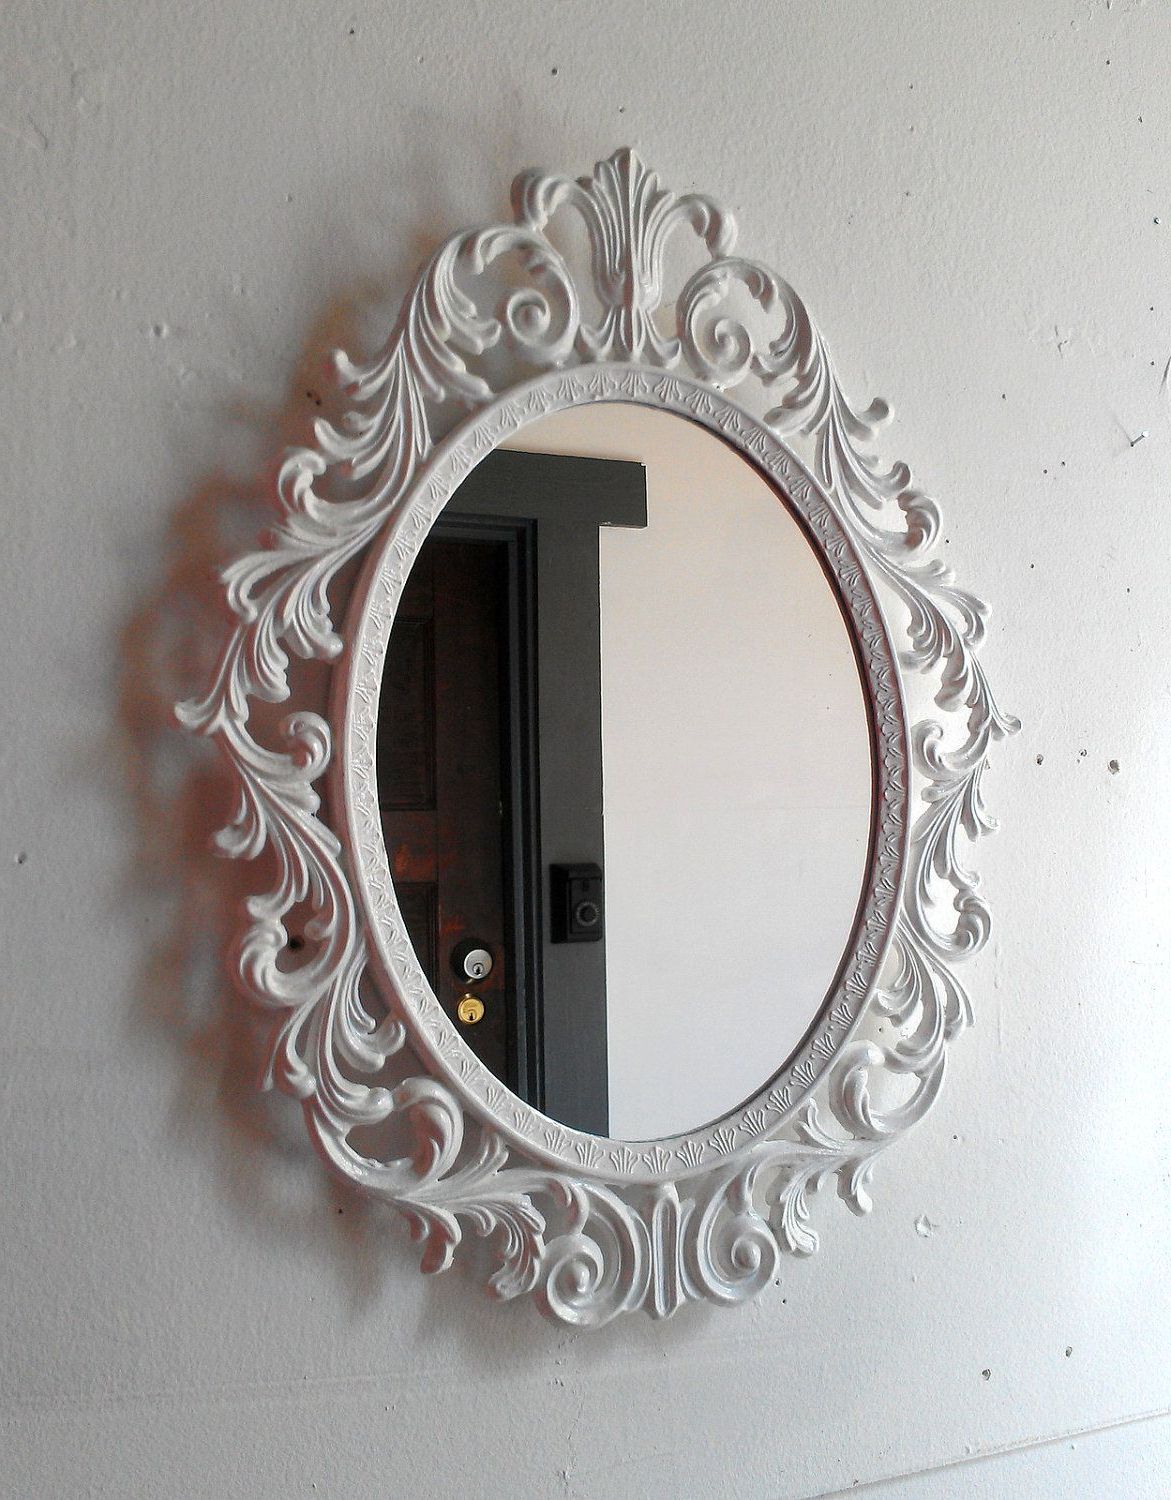 Princess Wall Mirrors Regarding Well Liked Fairy Princess Wall Mirror – 1310 In True White (View 1 of 20)